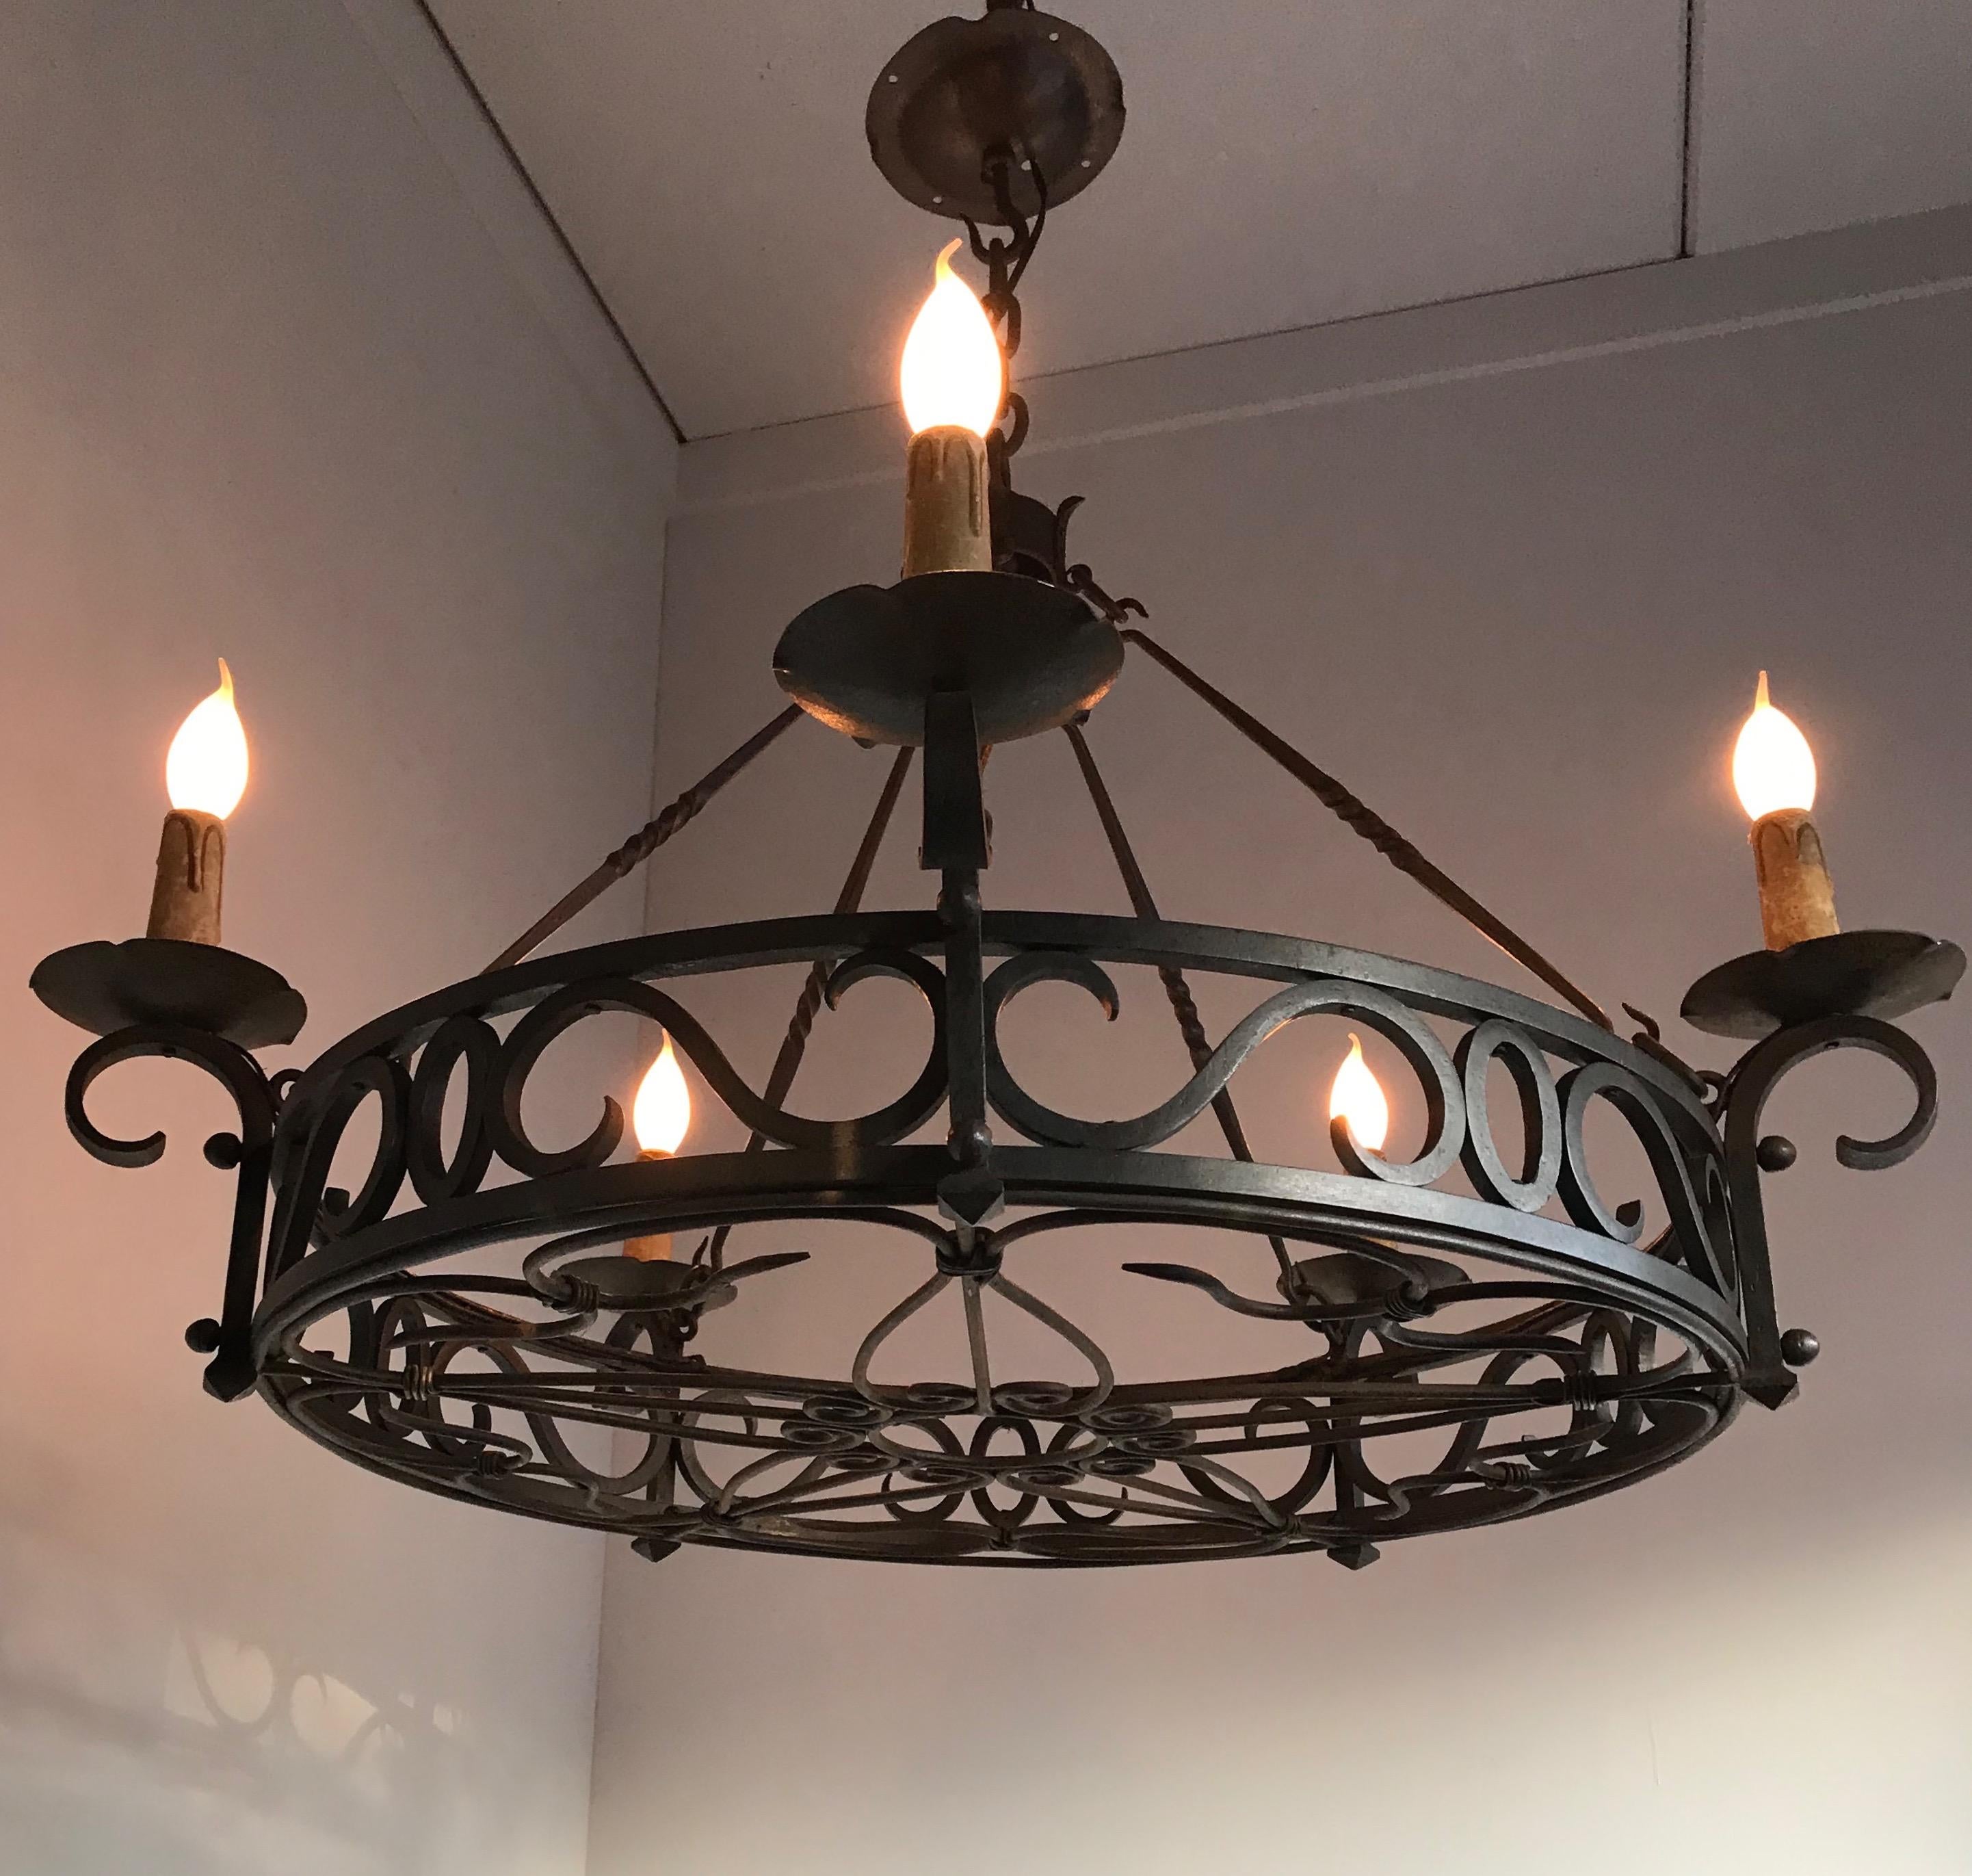 Forged Large Arts & Crafts Wrought Iron Chandelier for Dining Room or Restaurant Etc.